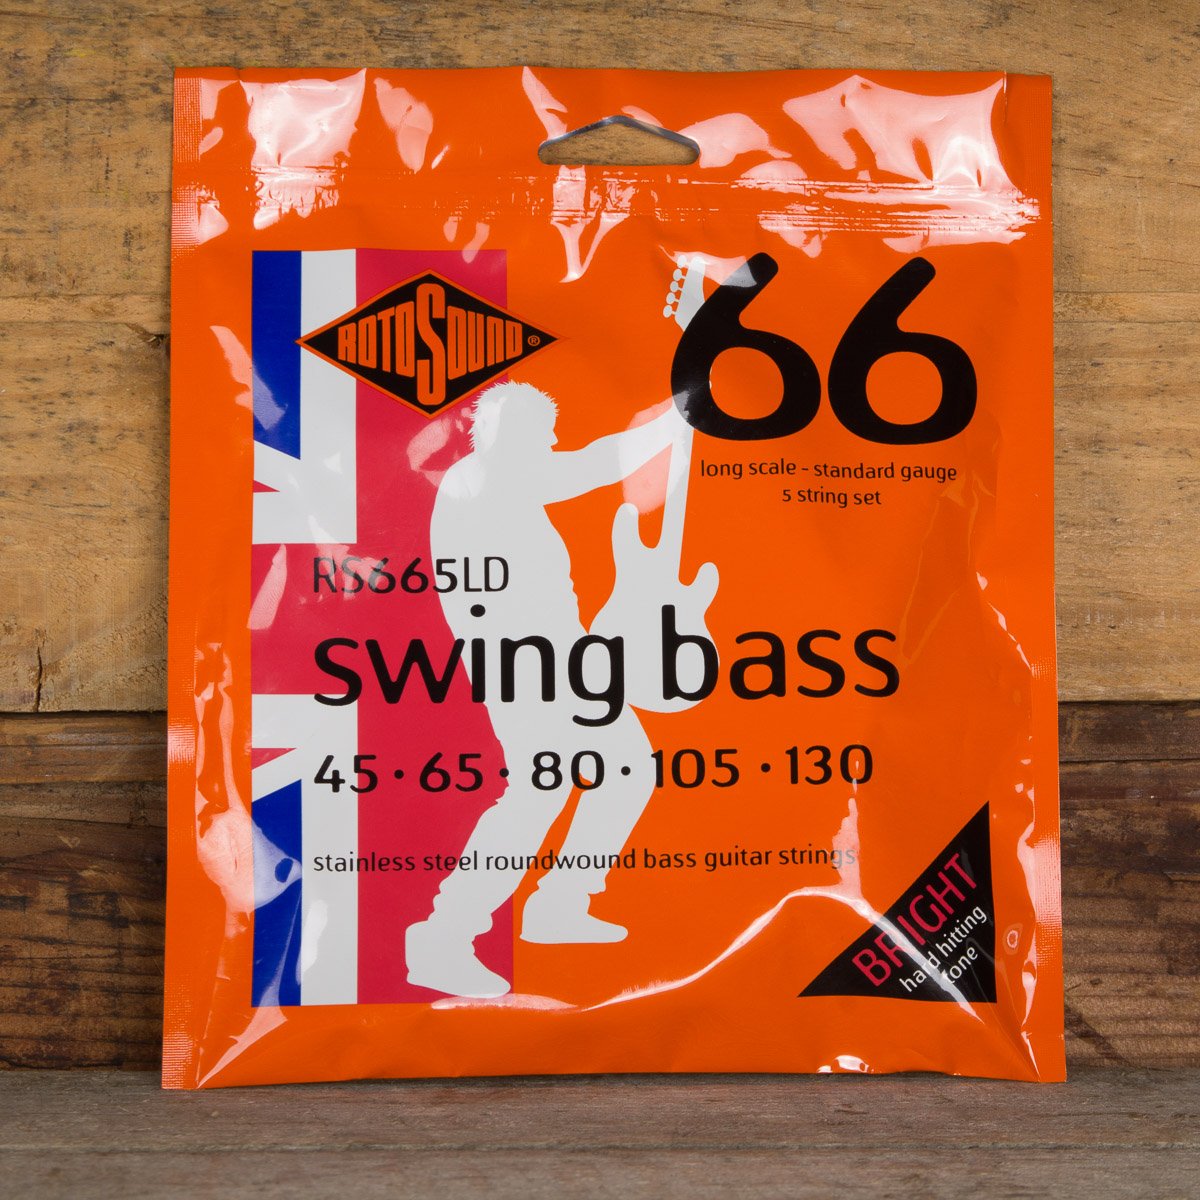 Rotosound RS665LD Swing Bass 66 5-String Long Scale Bass Strings - 45-130